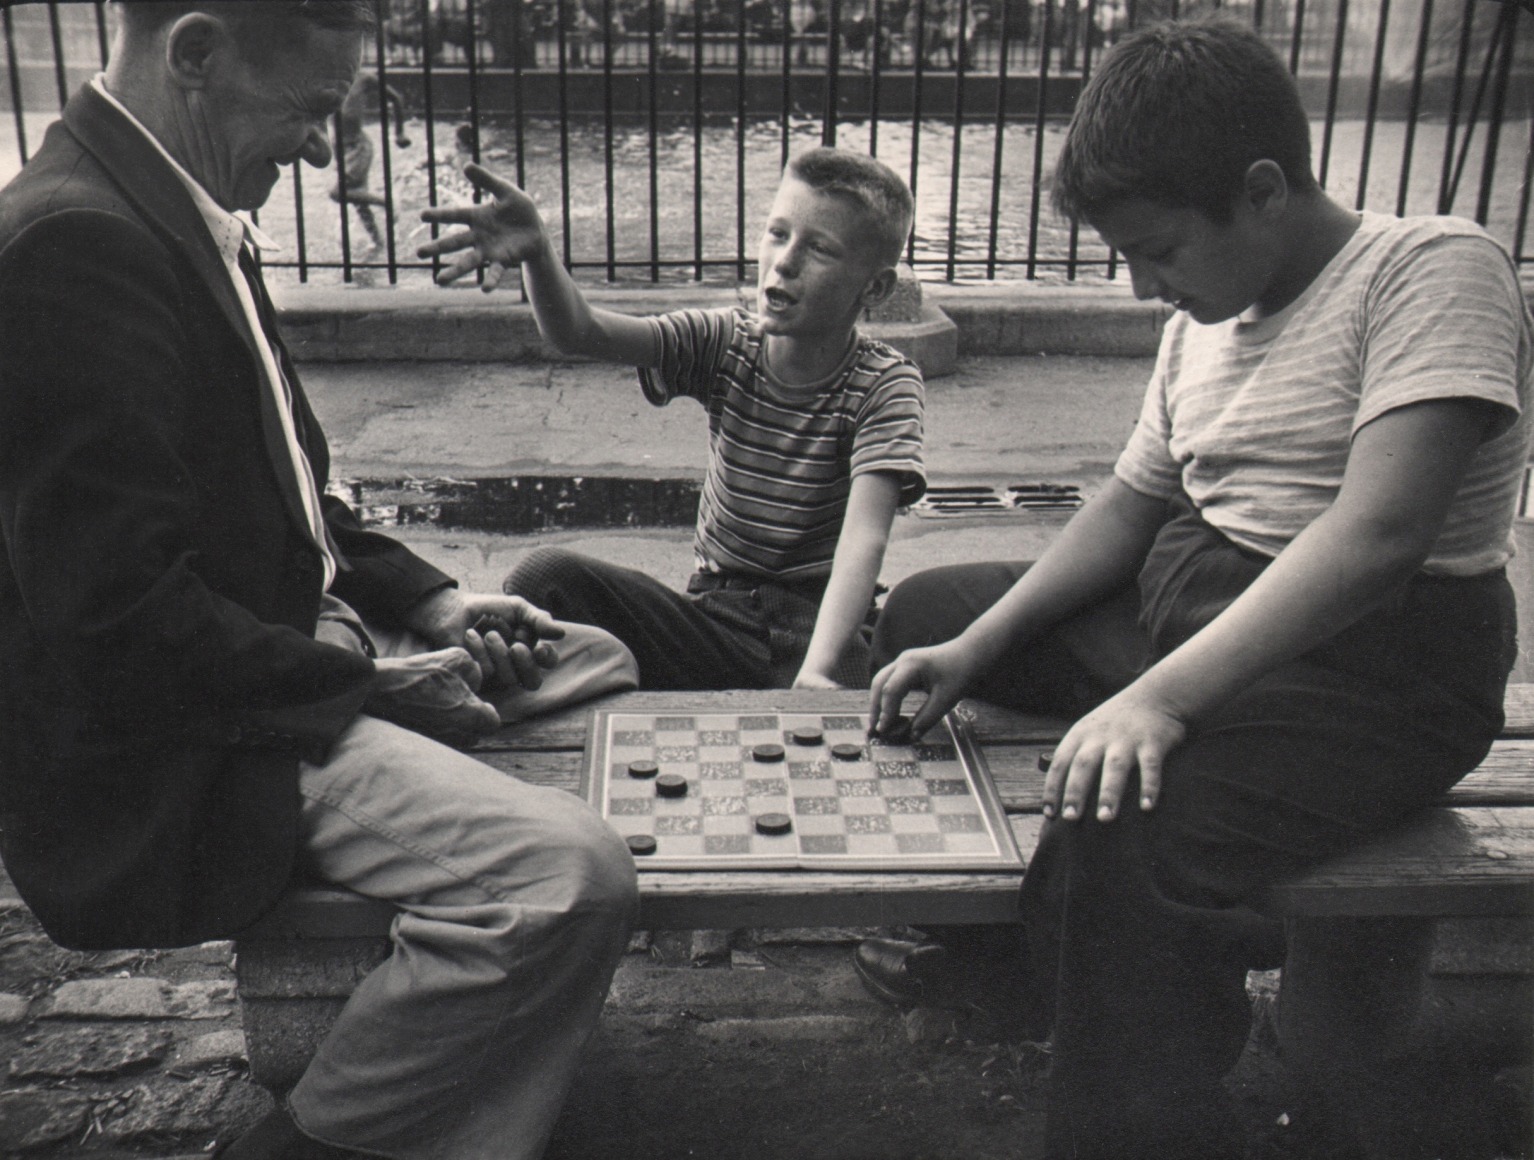 14. Jeanne Ebstel, Untitled, c. 1947. A young boy and a man sit across from each other playing checkers. Another boy seated between them gestures emphatically towards the man.